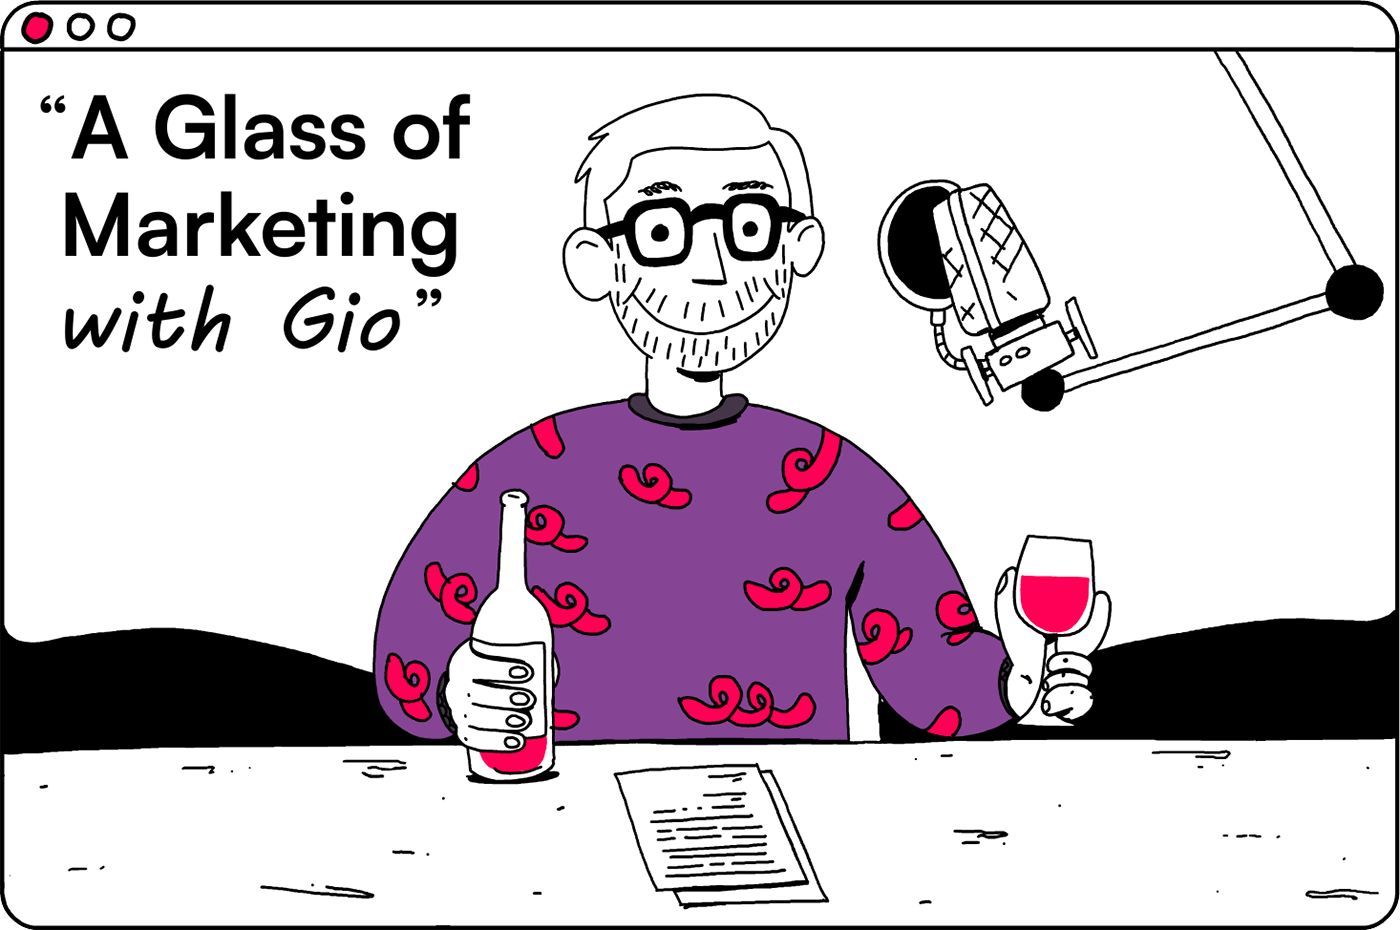 A glass of Marketing with Gio